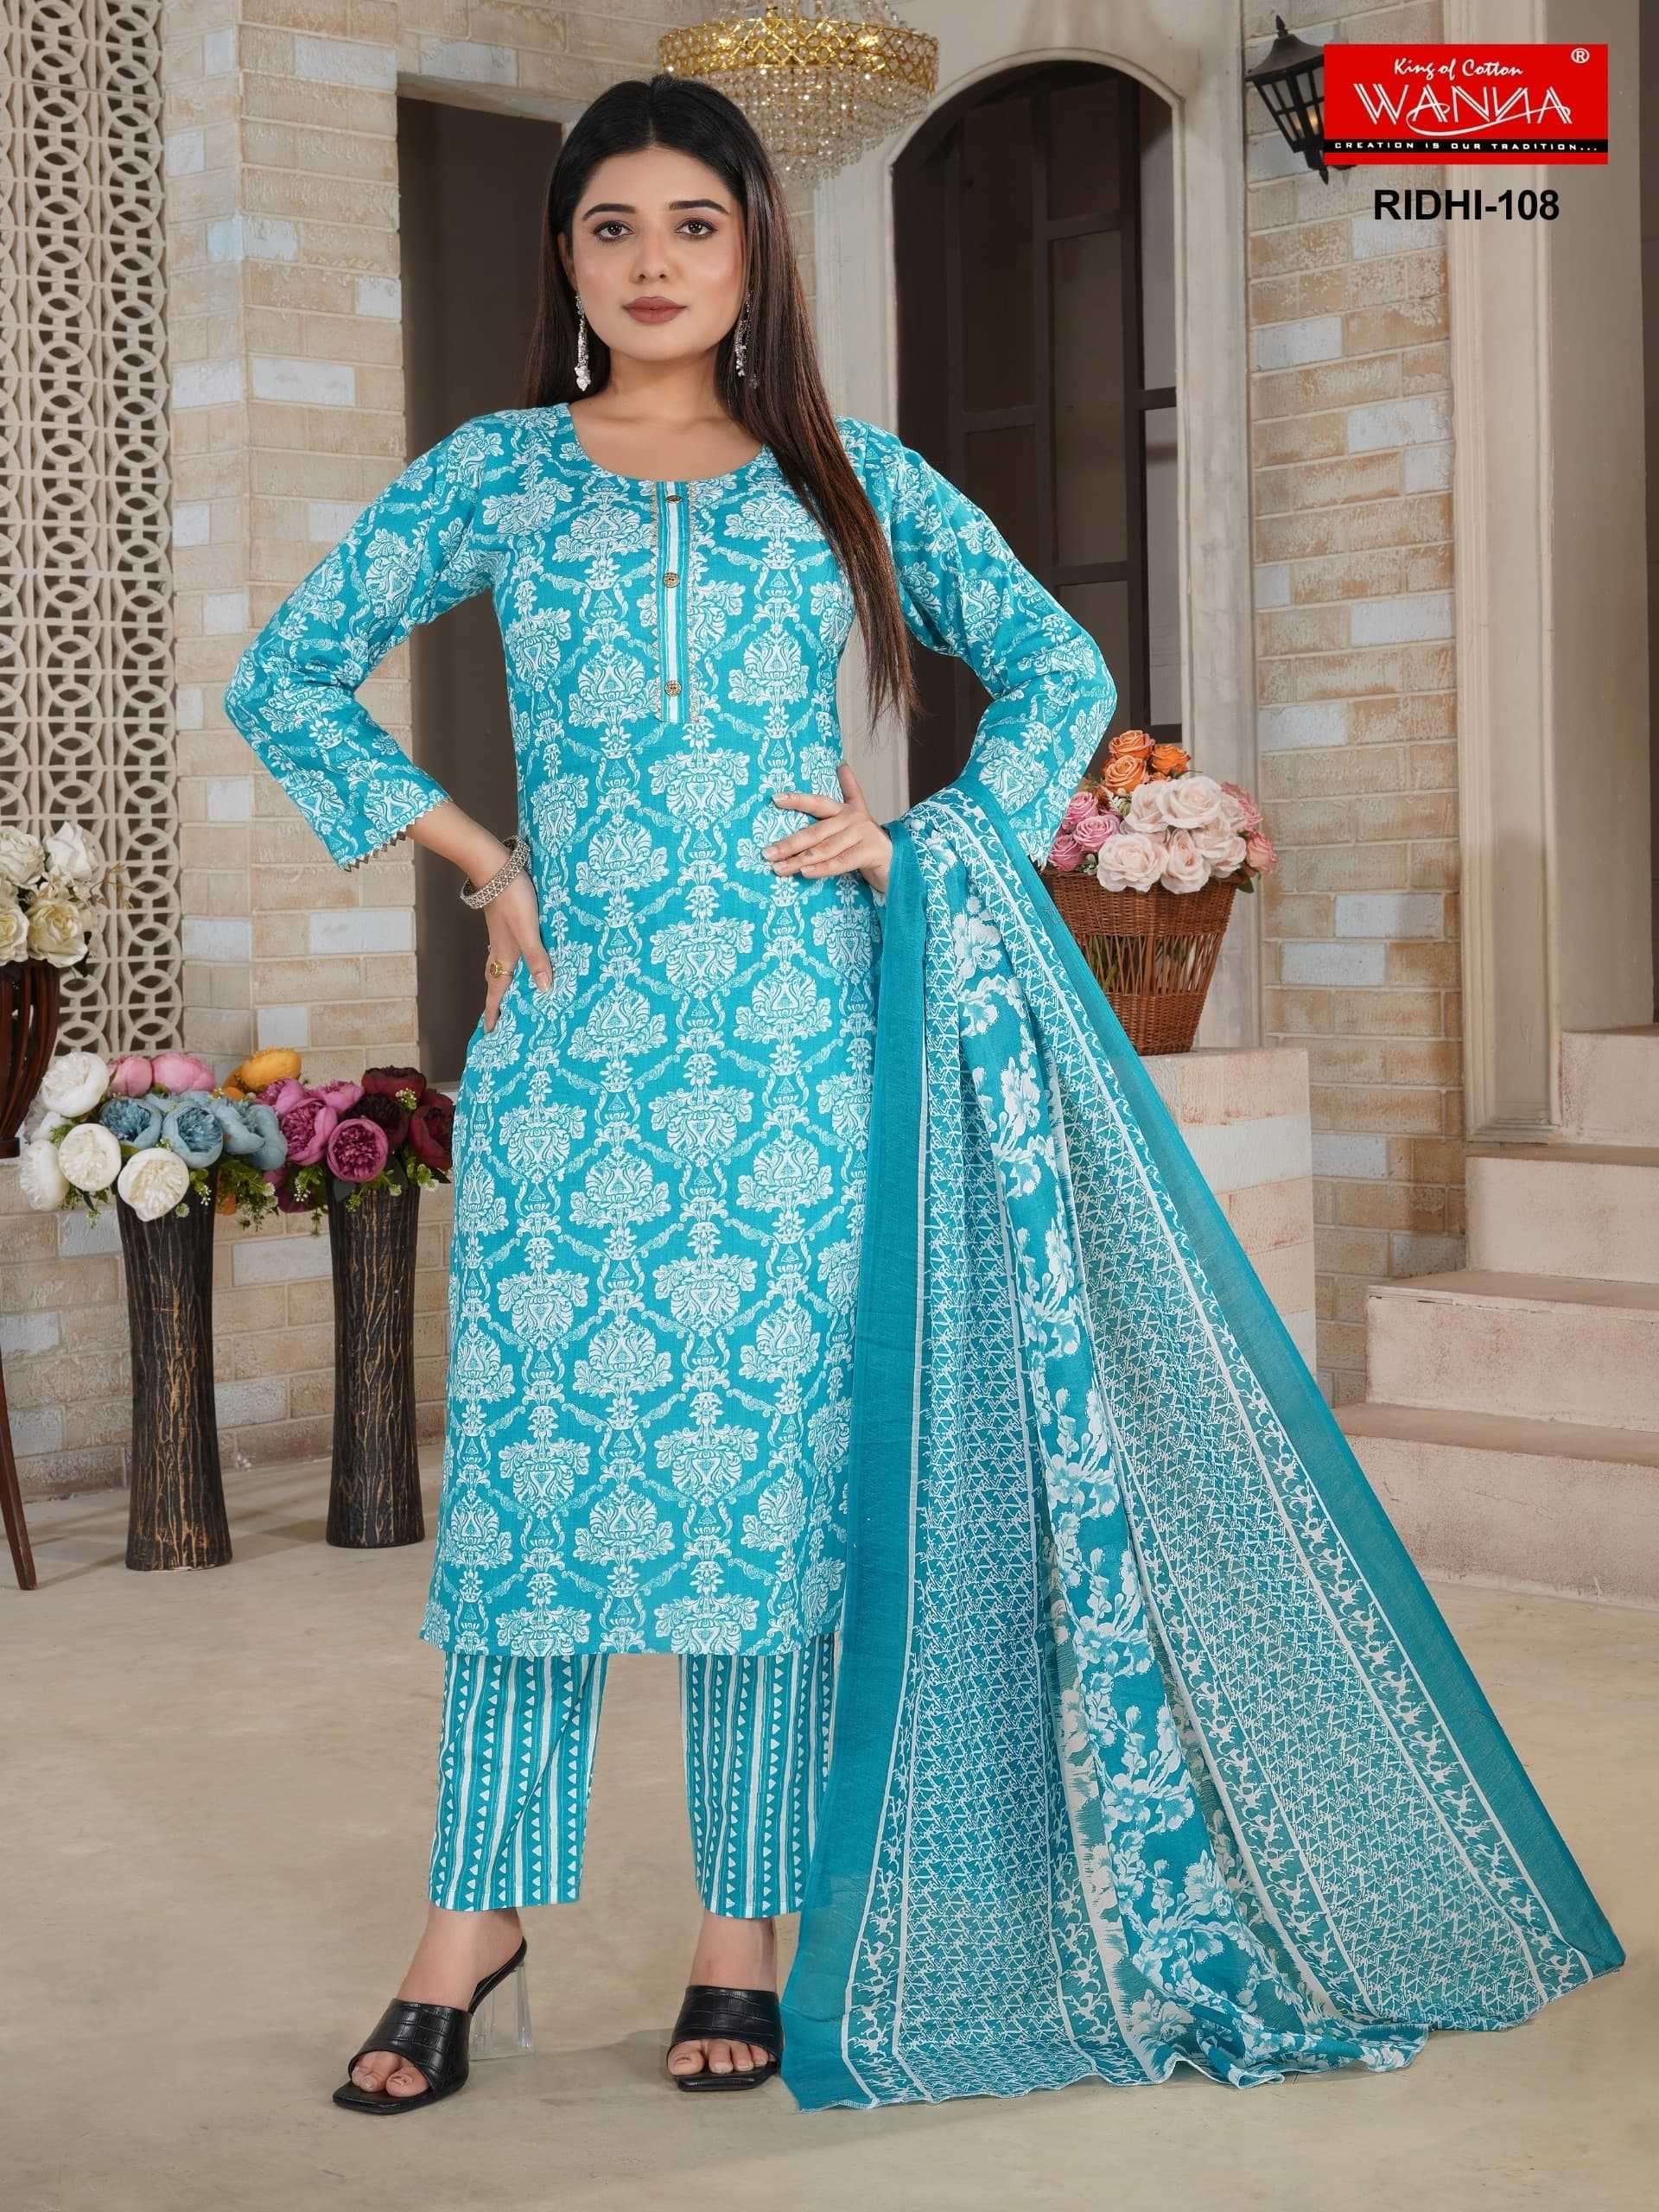 wanna ridhi series 101-108 Fine Quality 40*60 Cotton readymade suit